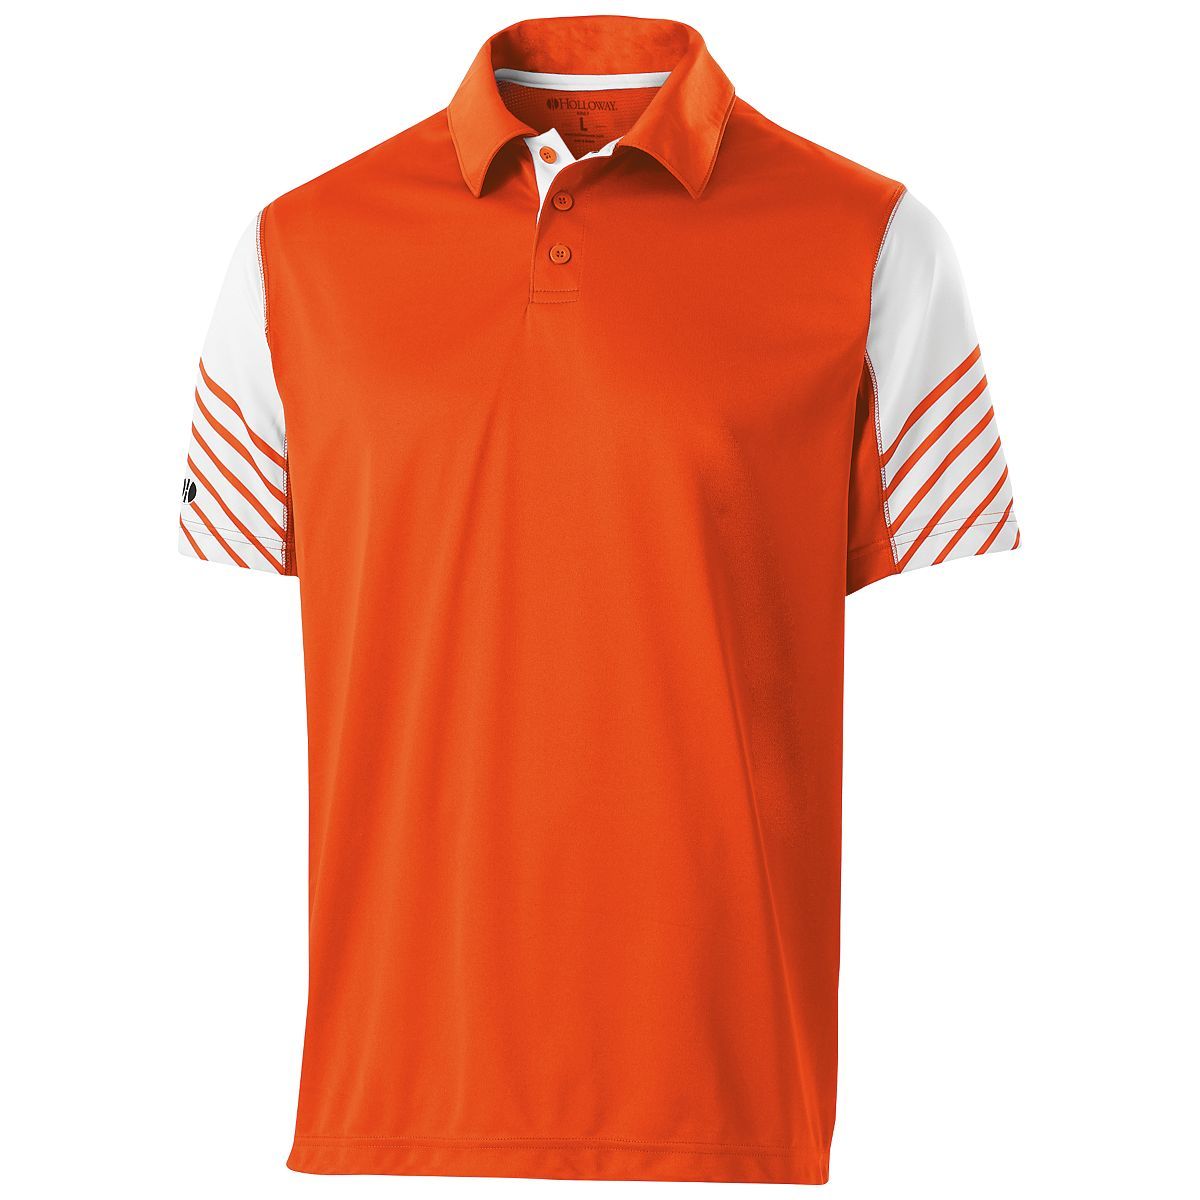 Holloway Arc Polo in Orange/White  -Part of the Adult, Adult-Polos, Polos, Holloway, Shirts product lines at KanaleyCreations.com